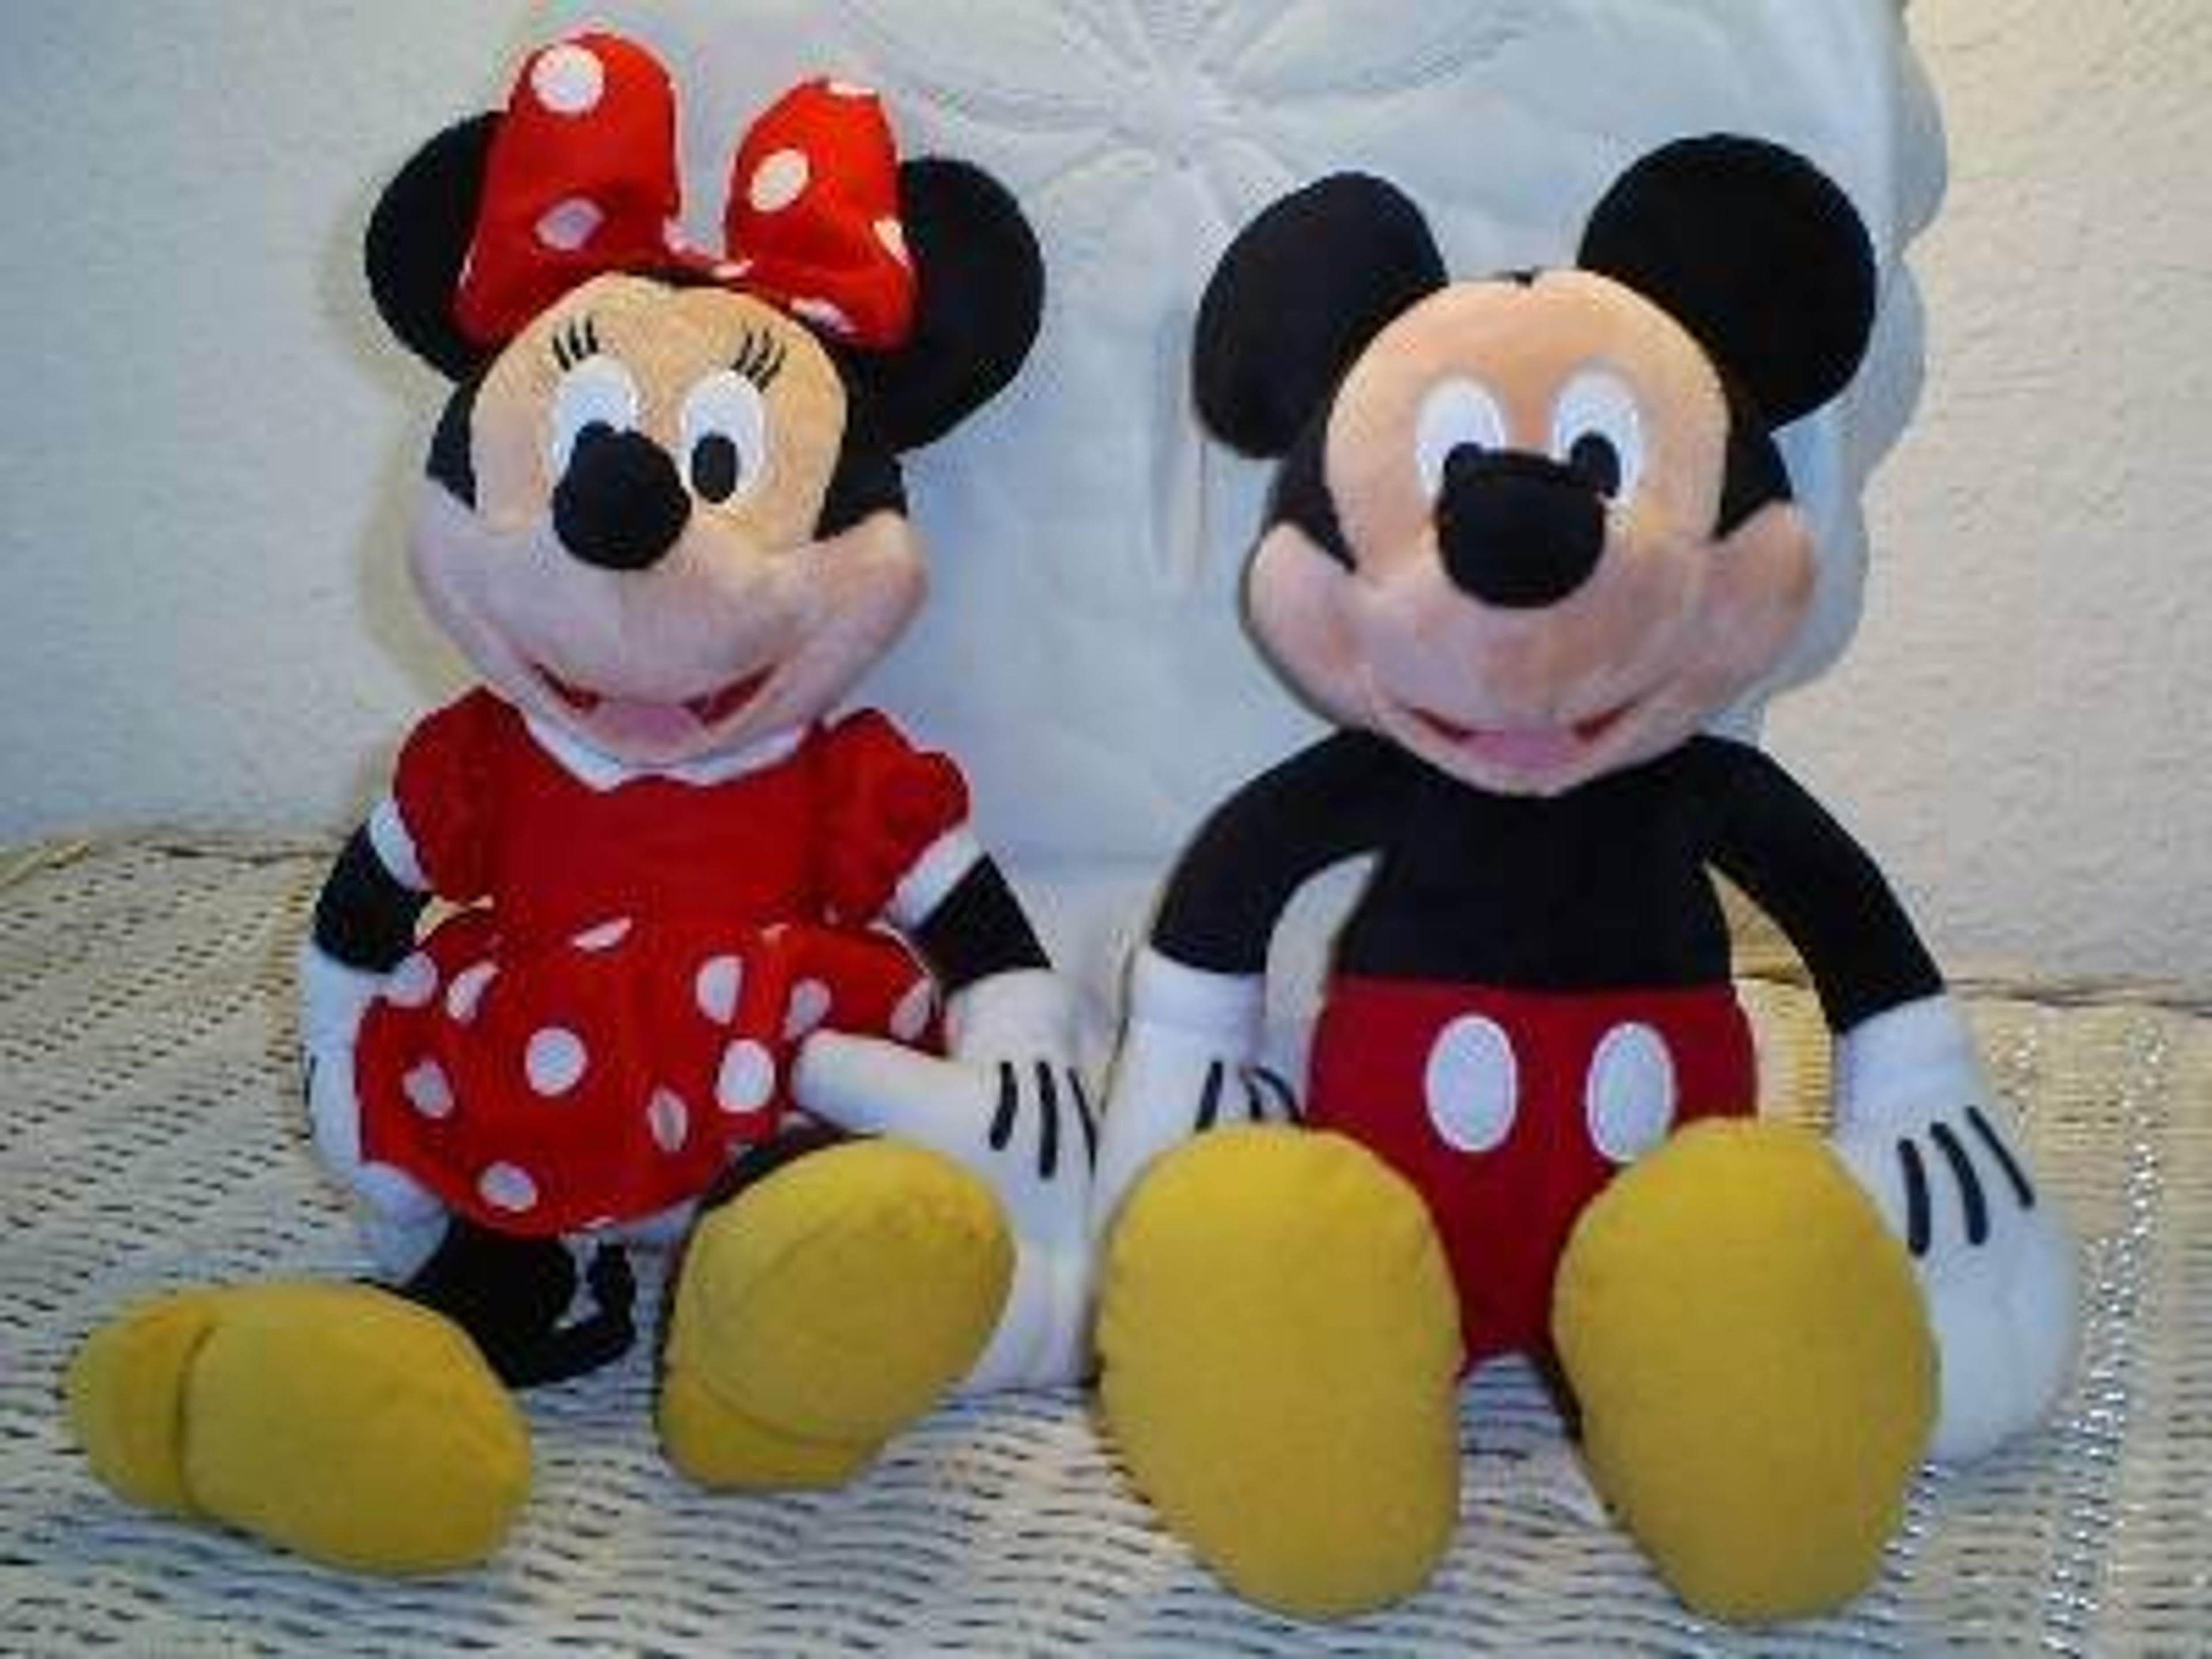 Come and stay with minnie and me !